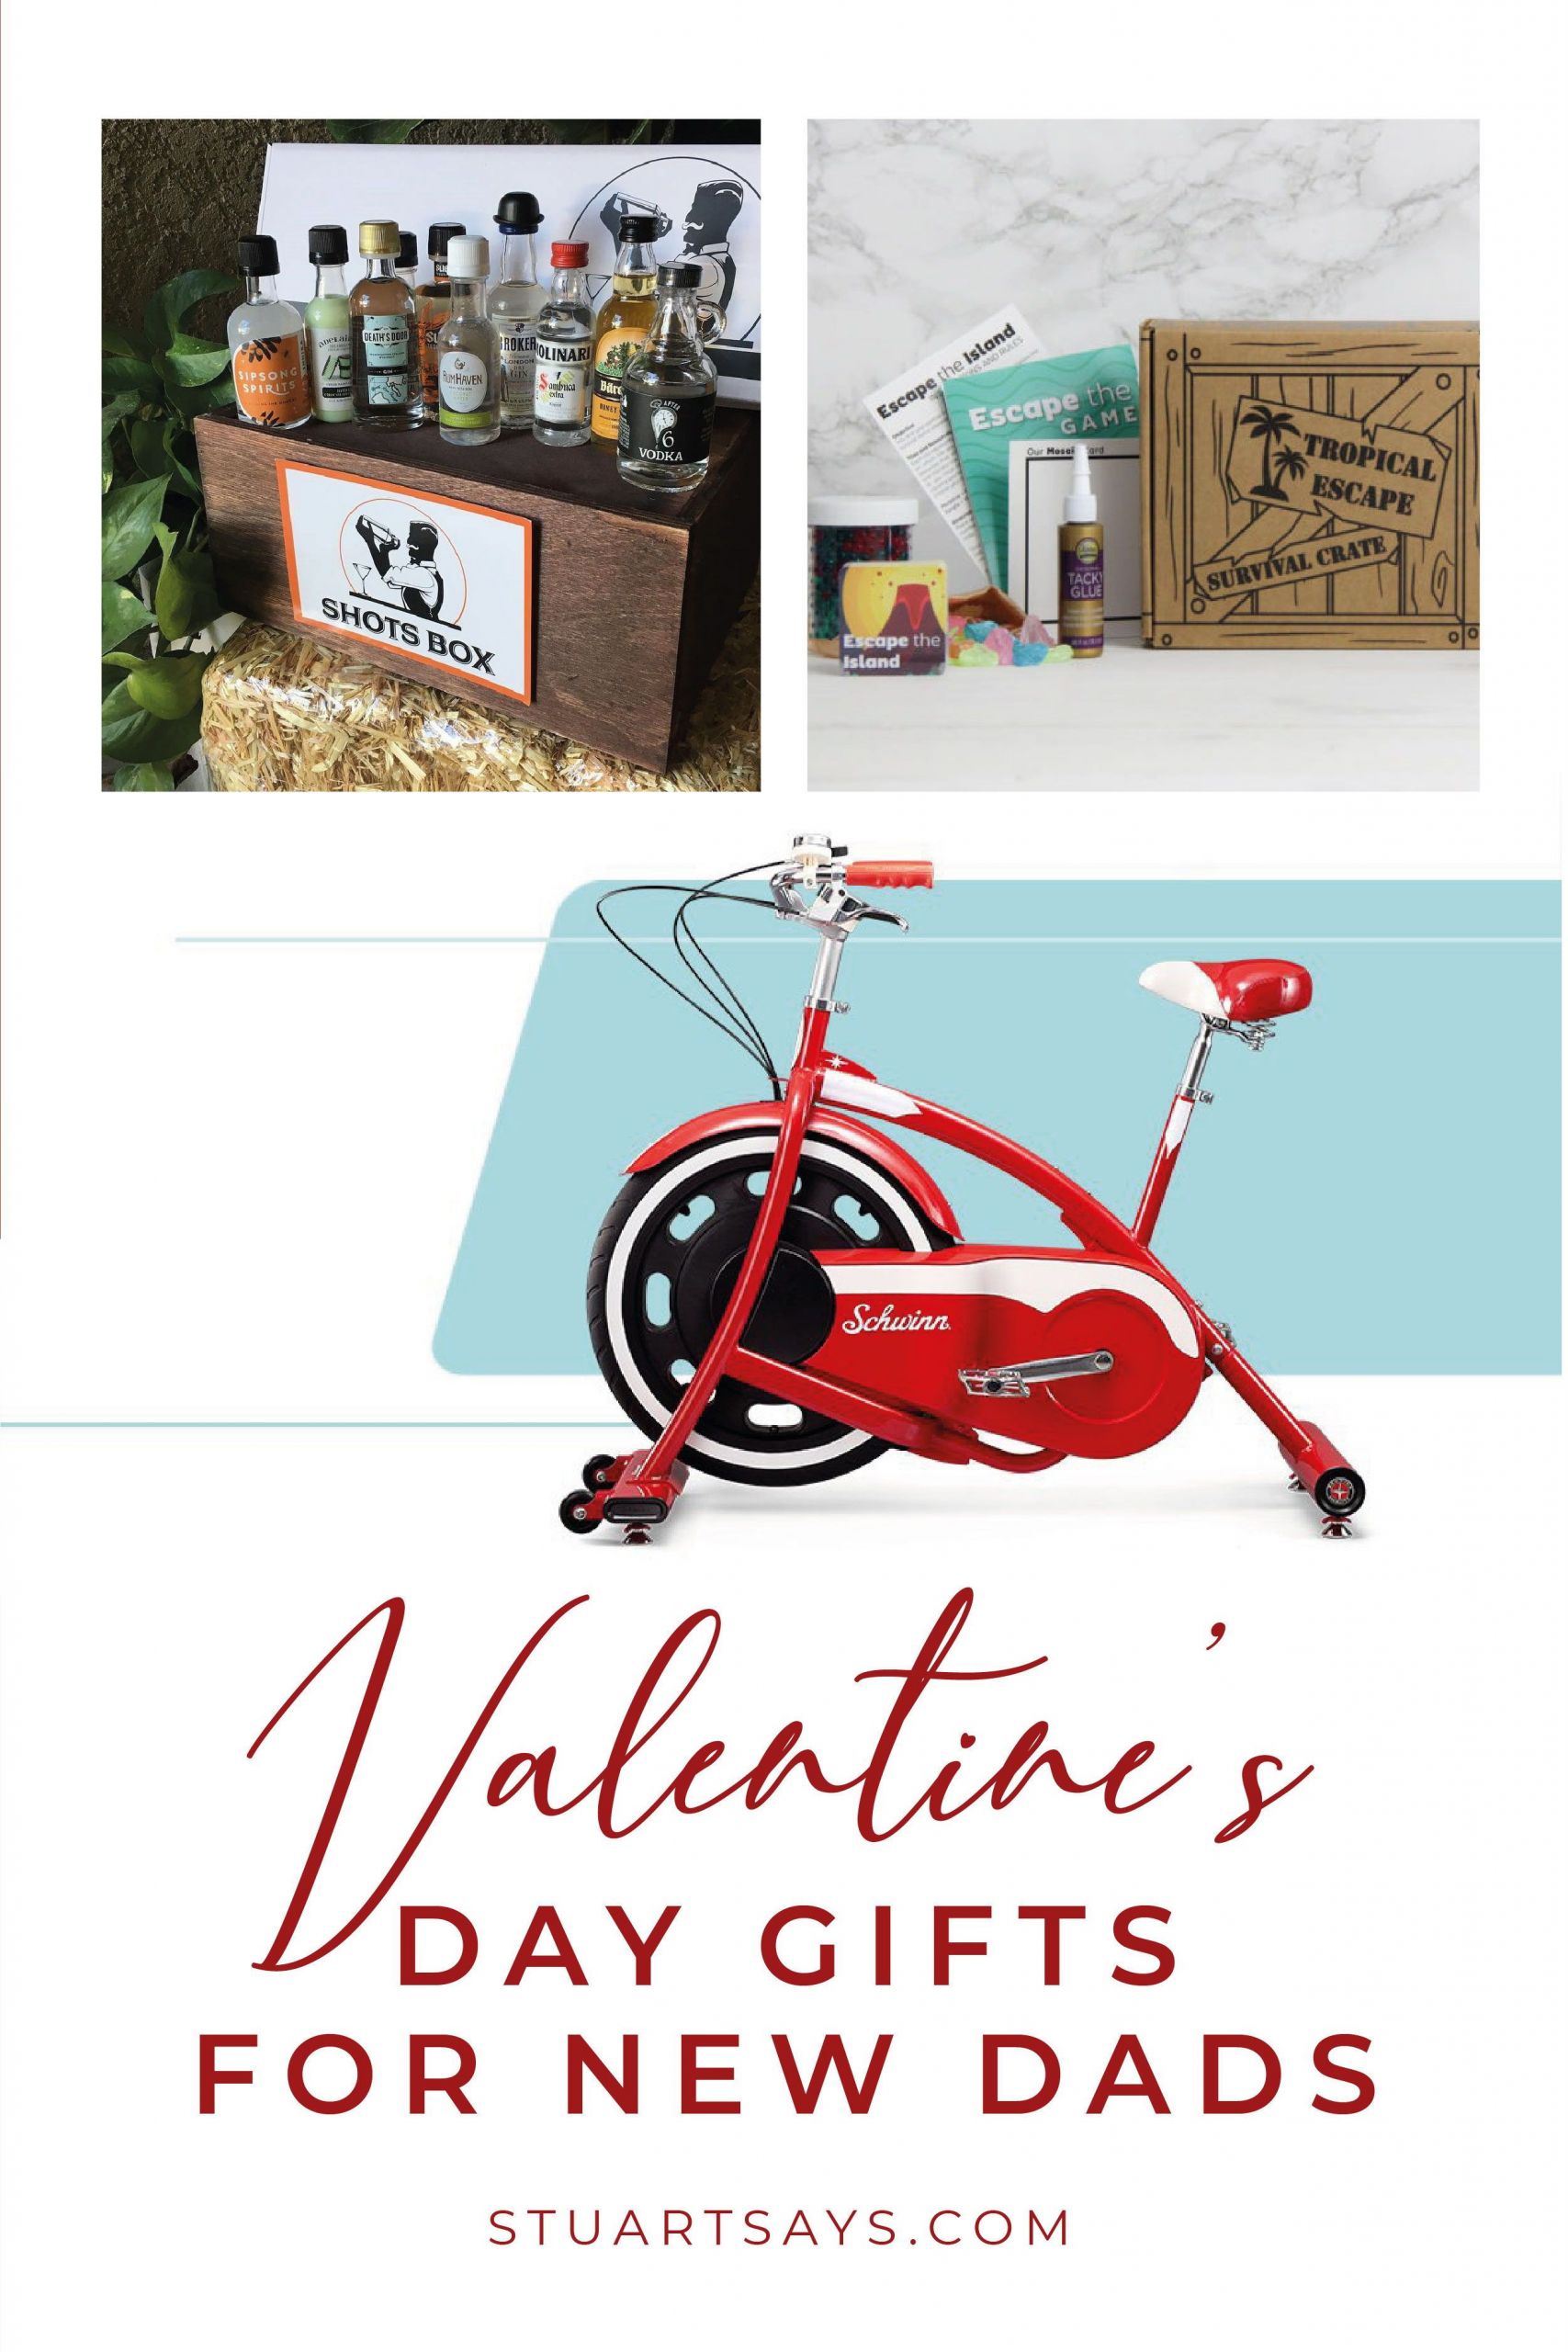 Valentine Gift Ideas For Dad
 Valentine’s Day Gifts for New Dads